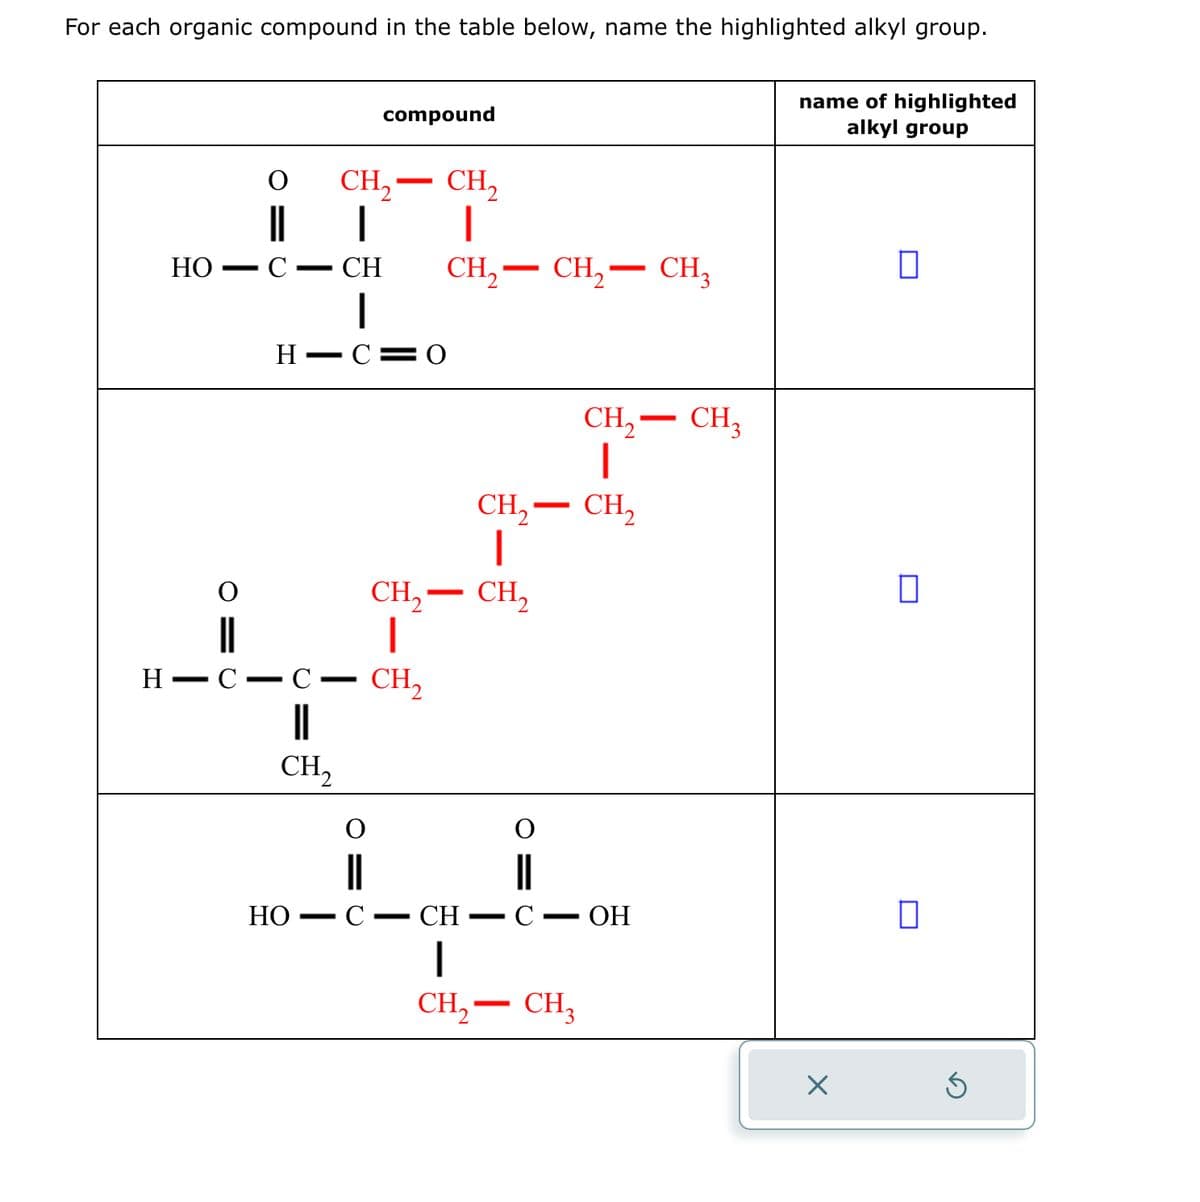 For each organic compound in the table below, name the highlighted alkyl group.
CH₂ - CH₂
1
4
HO C CH CH₂ CH₂ CH3
HIC=0
compound
HO
HIC C CH₂
||
CH₂
-
CH₂ - CH₂
|
C- CH
CH₂ - CH₂
I
-
-
CH₂ - CH₂
I
|
CH₂ - CH3
C - OH
name of highlighted
alkyl group
X
0
□
0